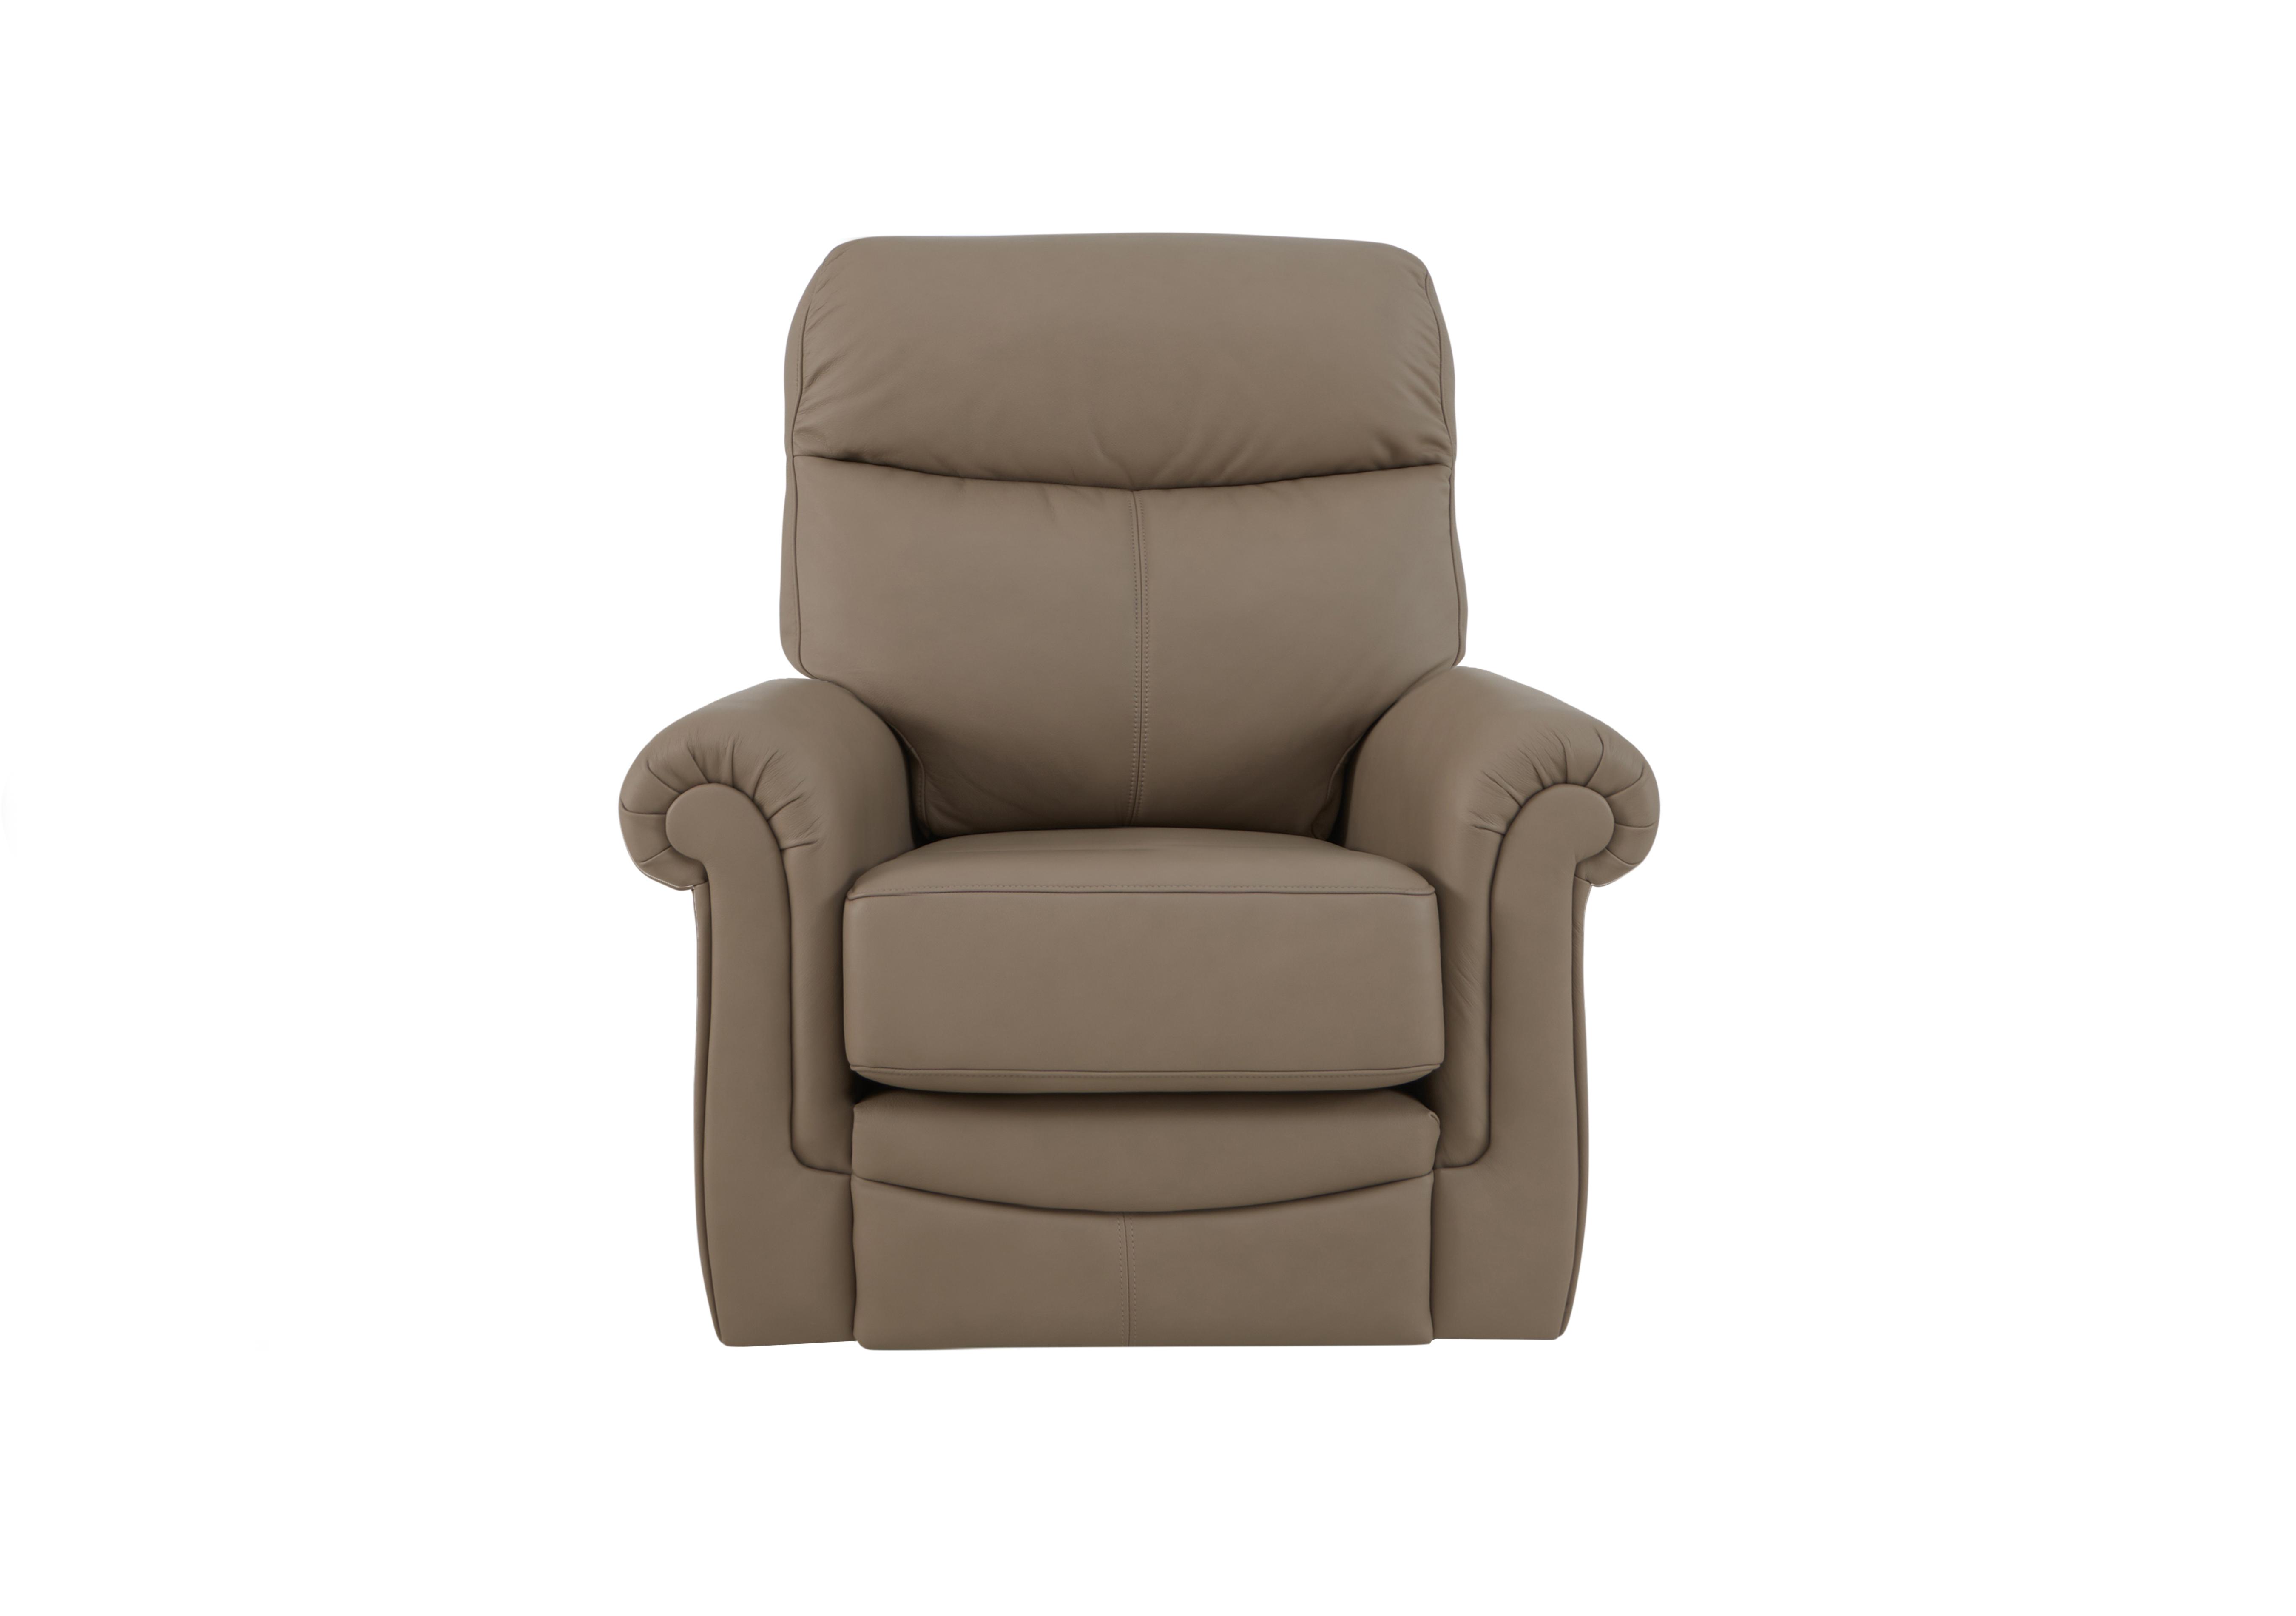 Avon Leather Lift and Rise Recliner Armchair in L846 Cambridge Taupe on Furniture Village